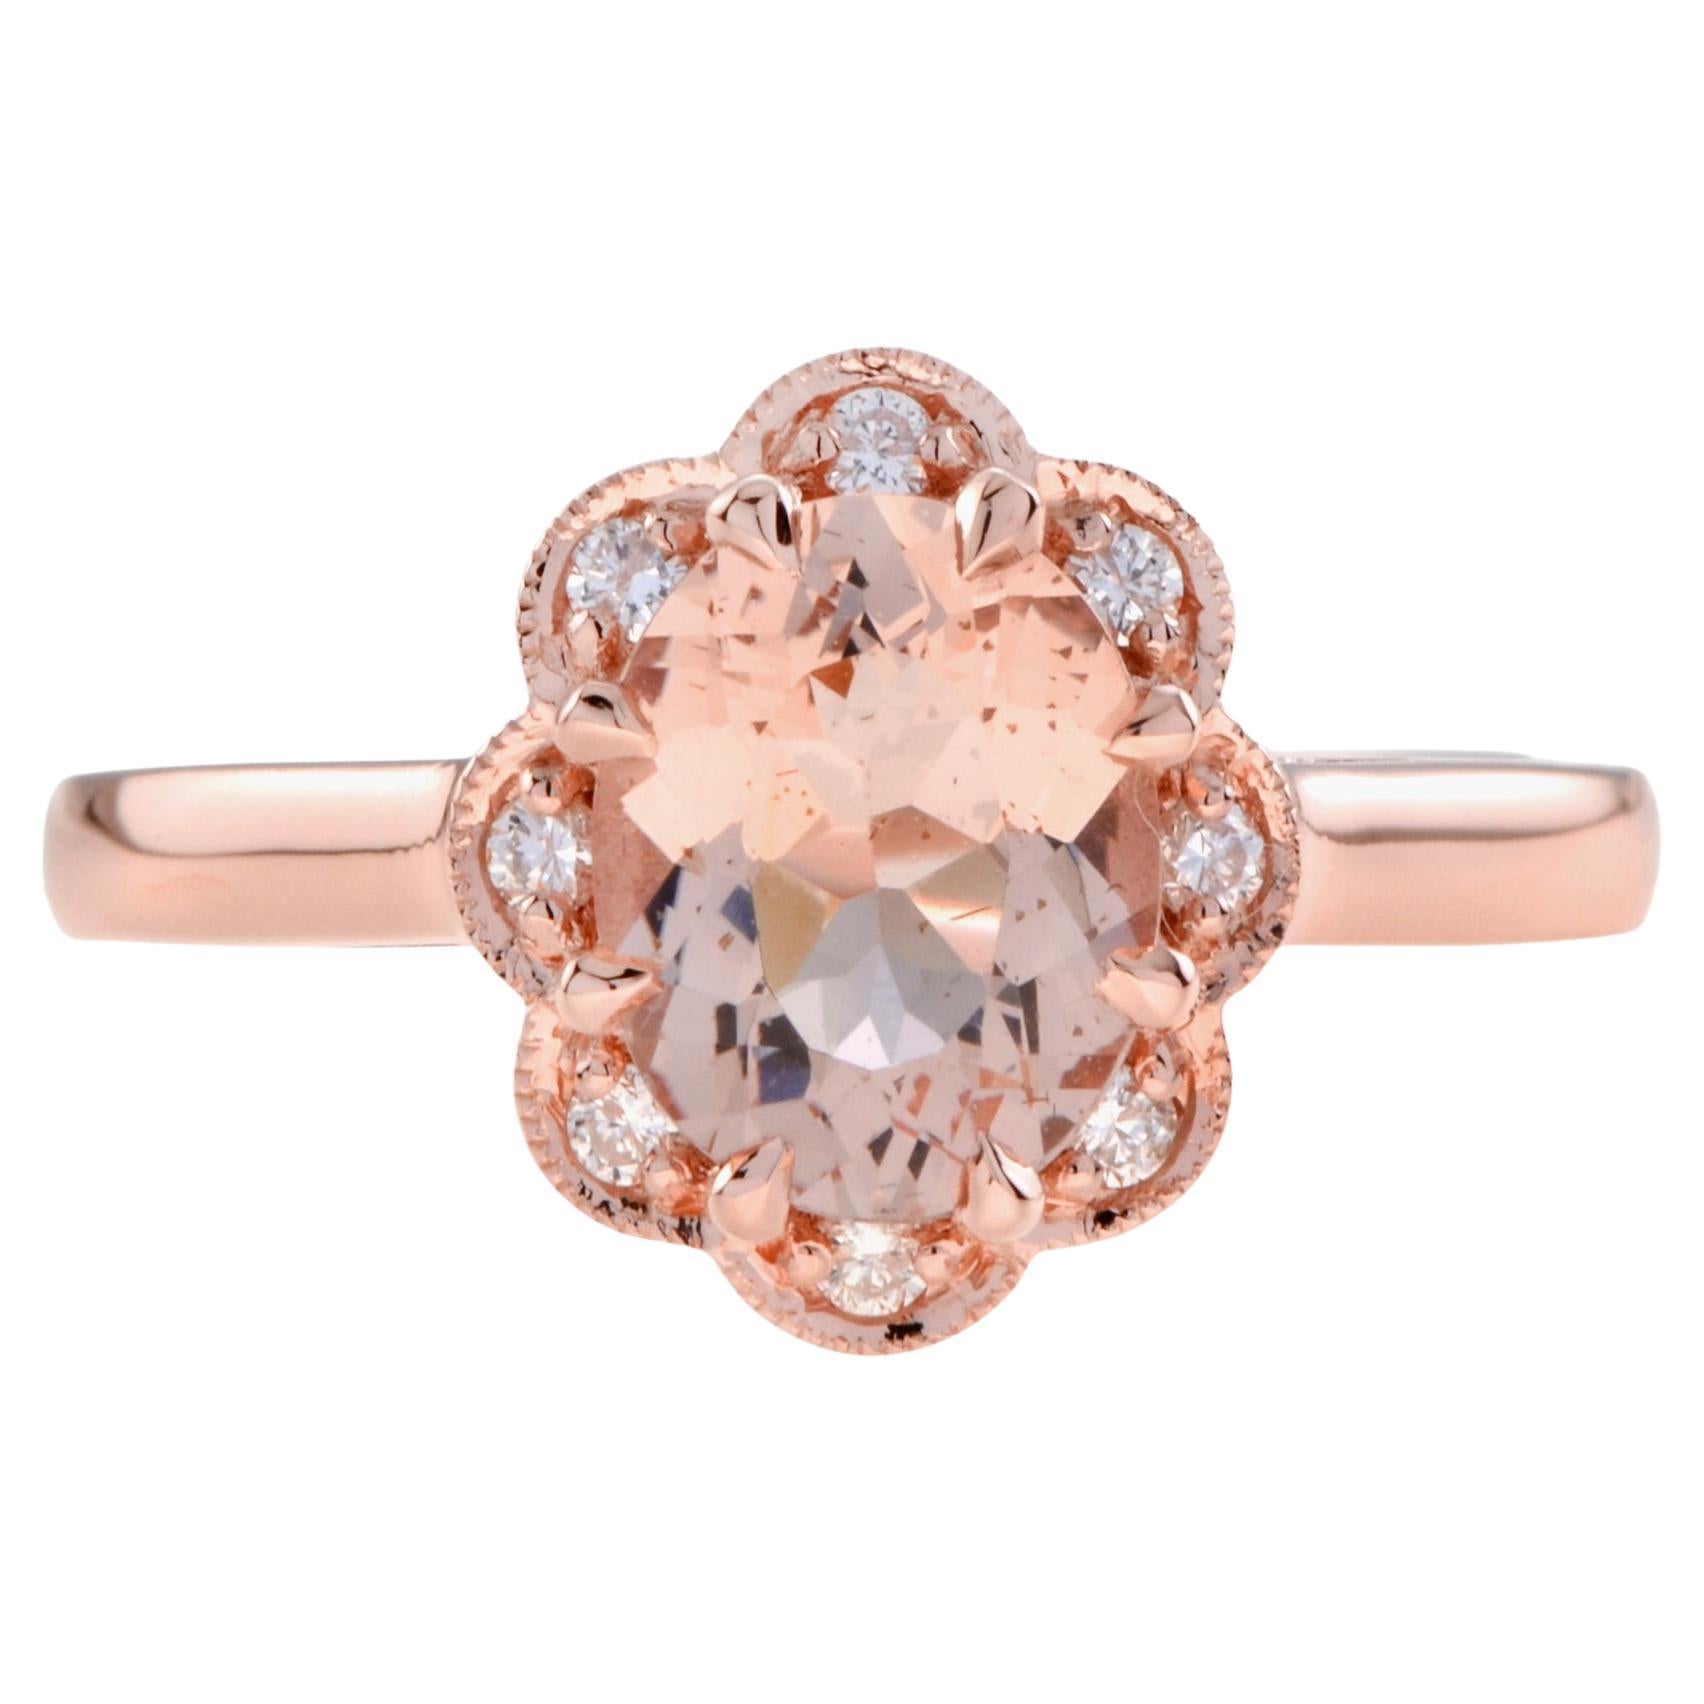 Oval Shaped Morganite and Diamond Halo Vintage Style Ring in 9k Rose Gold